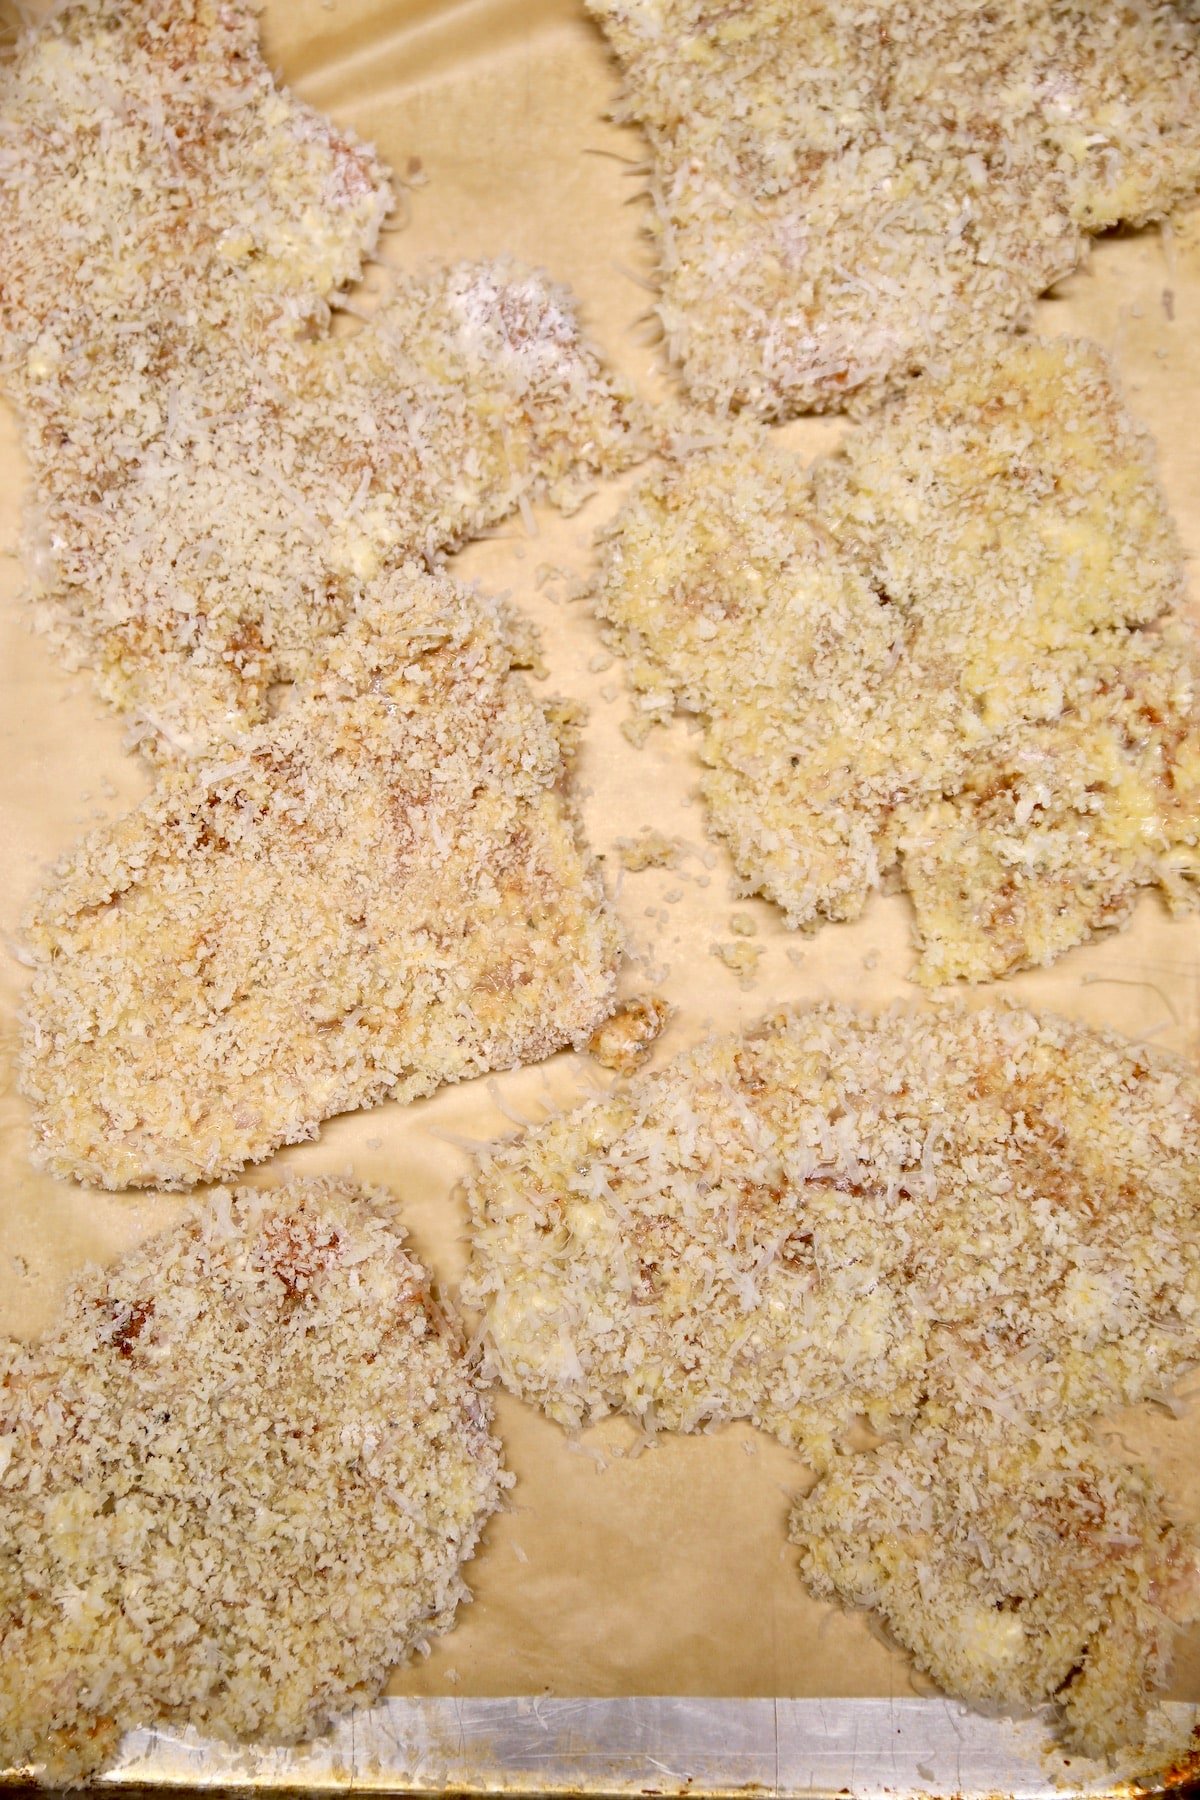 Breaded chicken cutlets ready to fry.